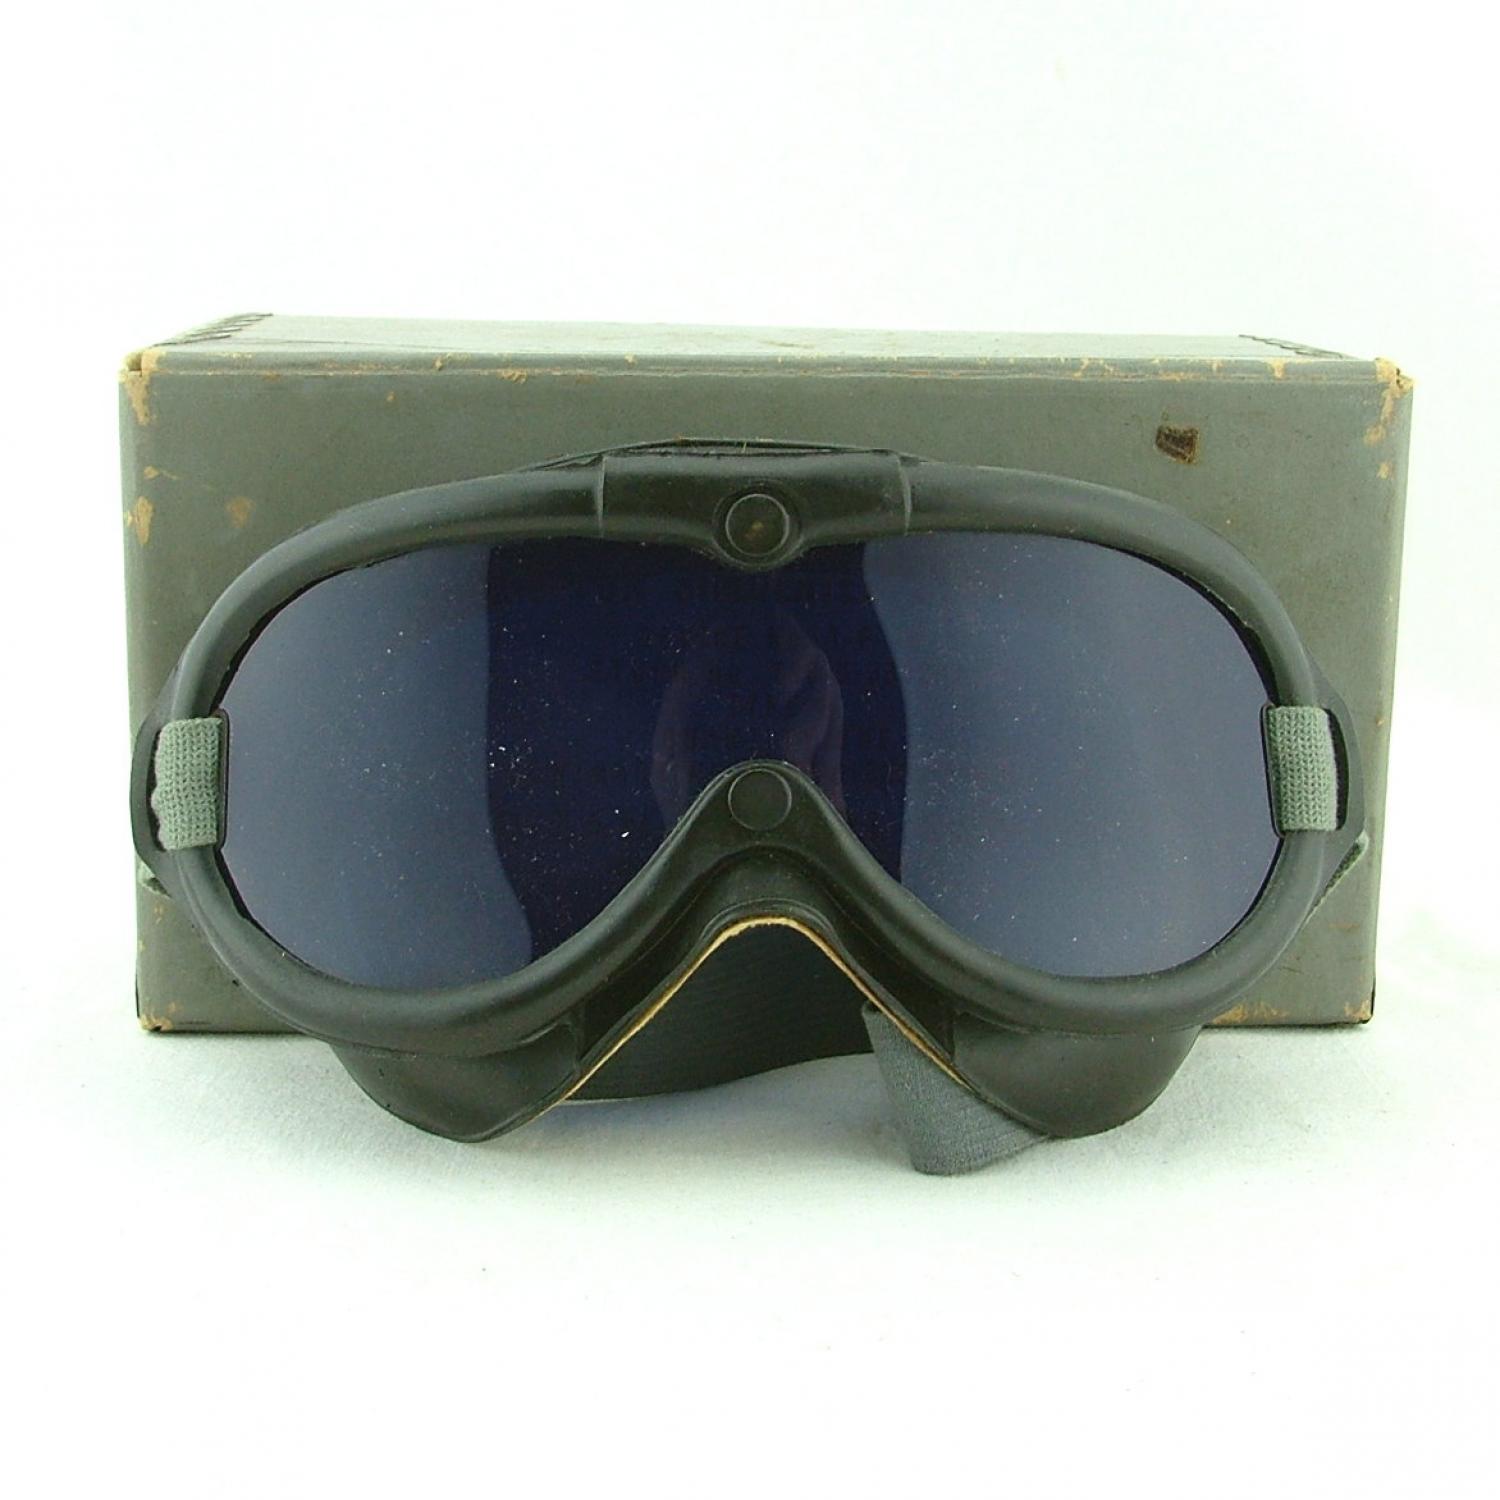 USN blind flying goggles, boxed